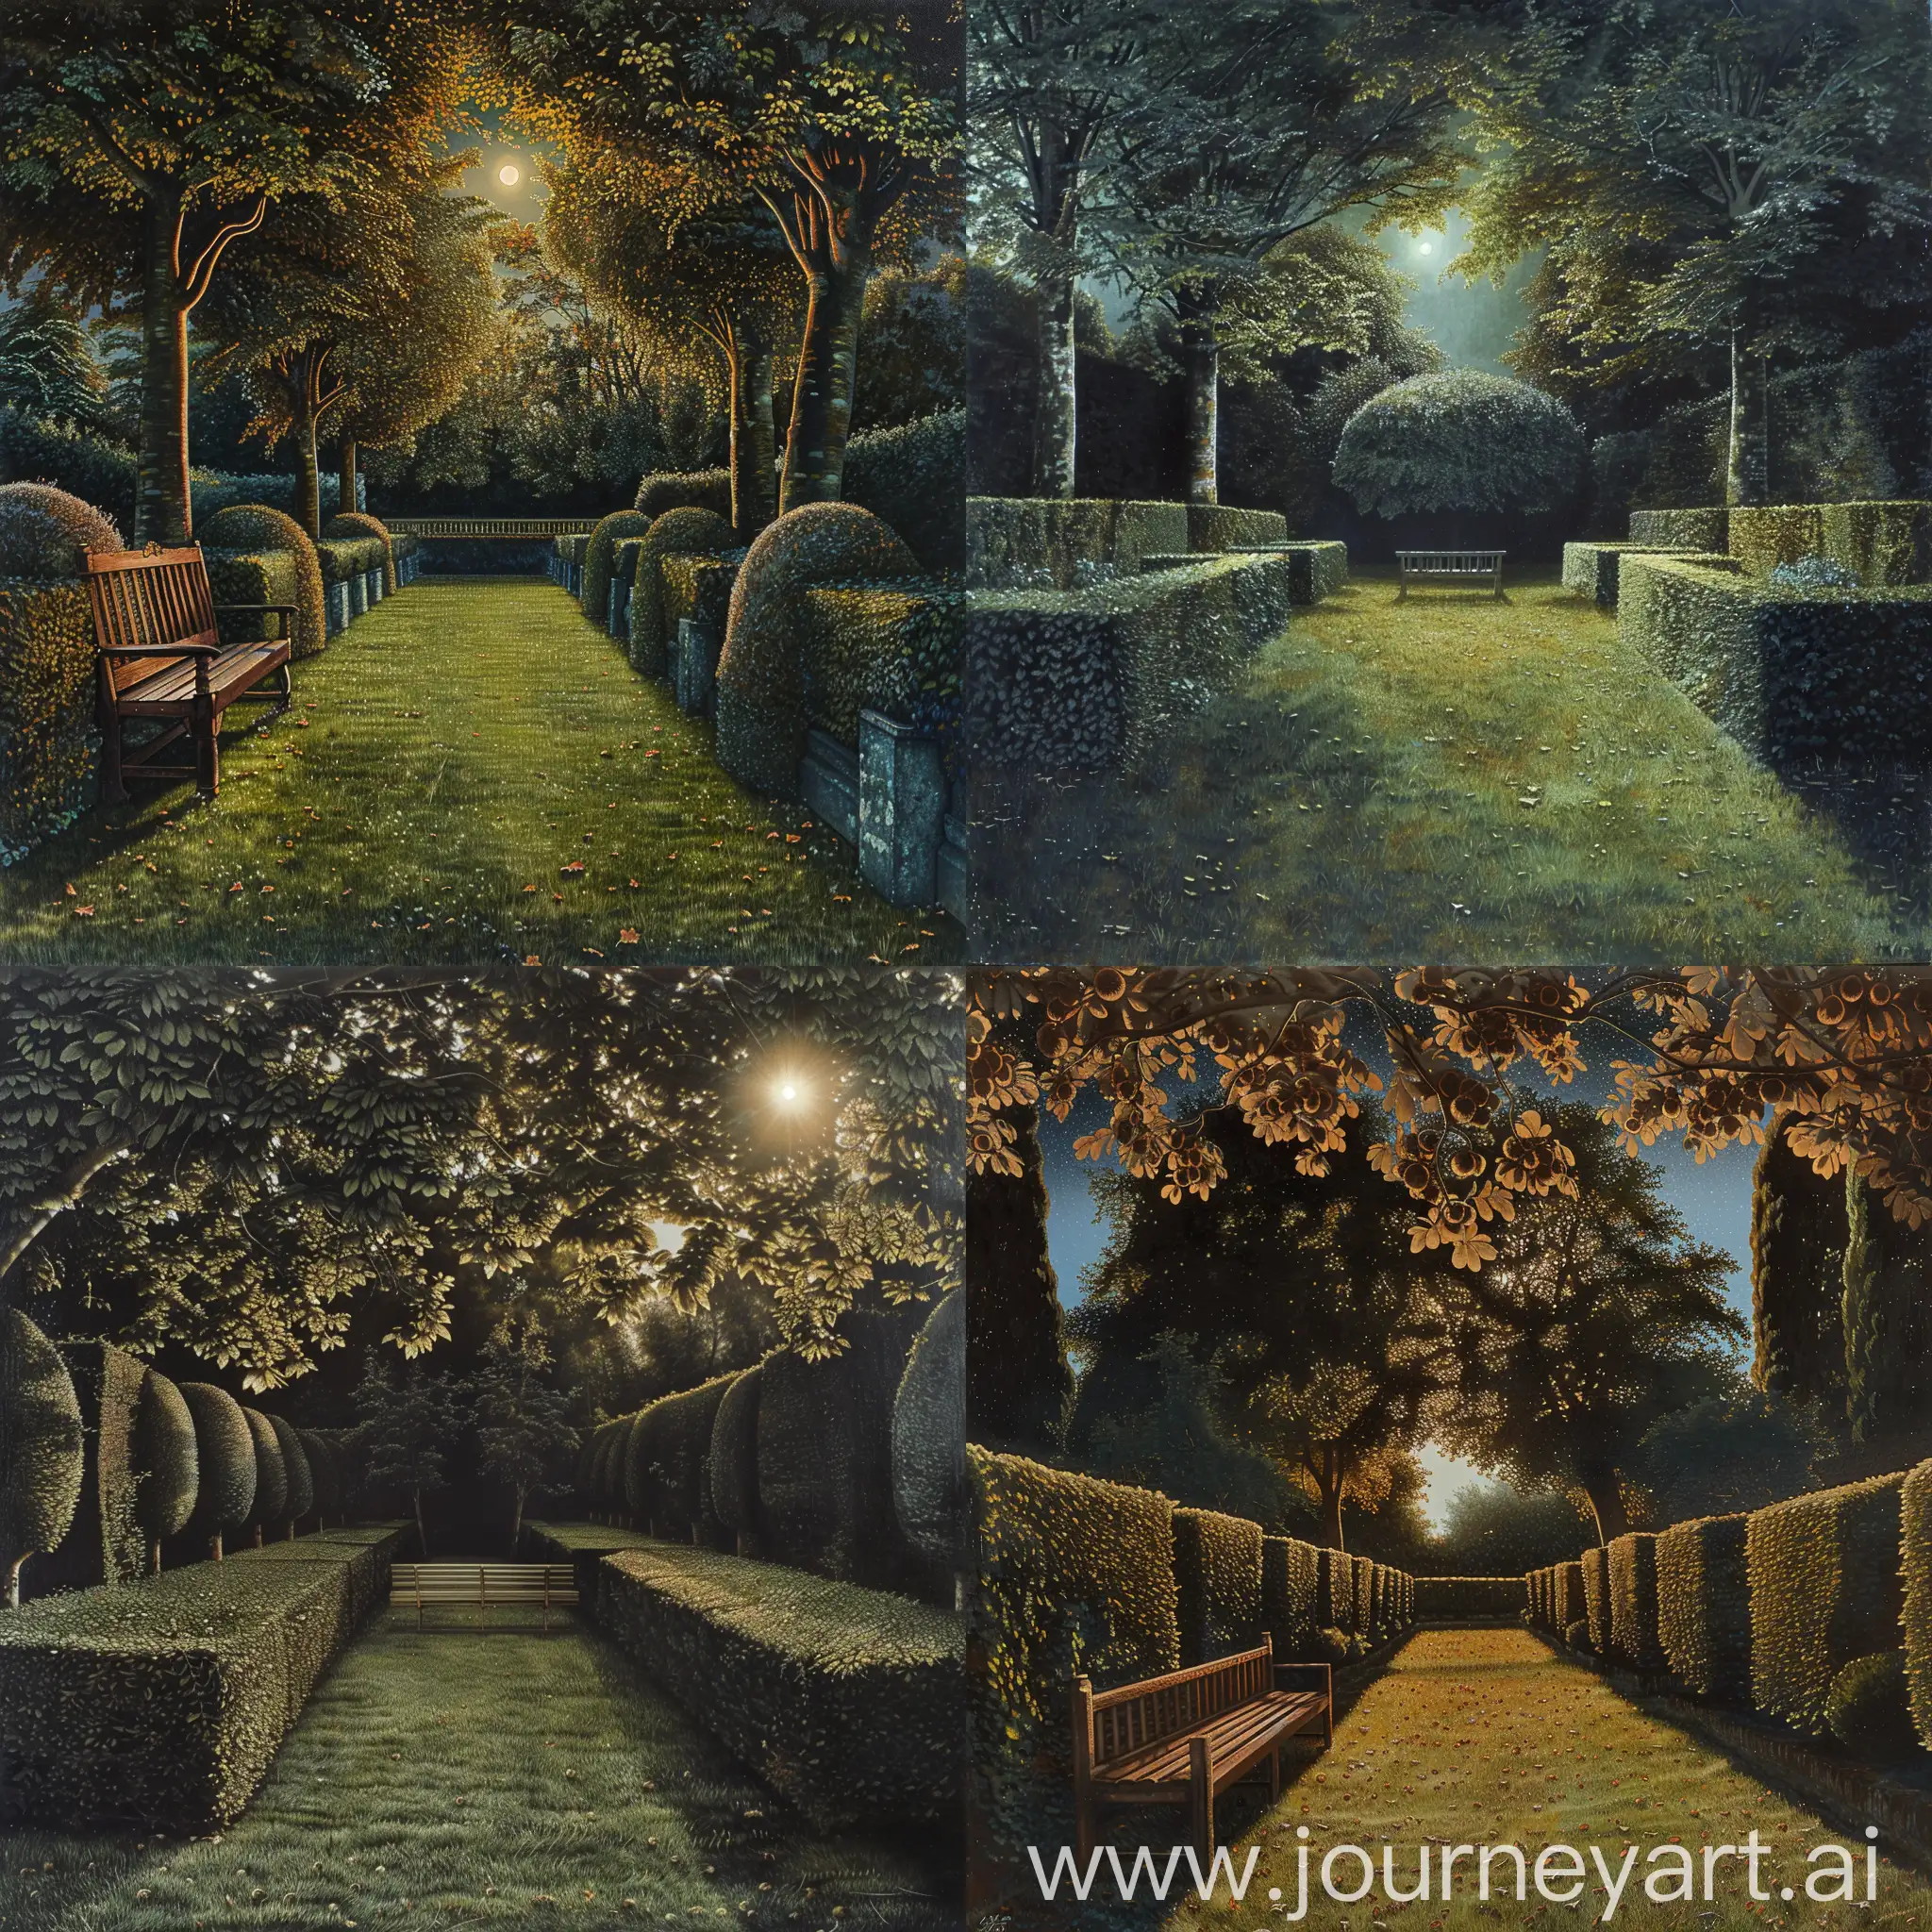 Moonlit-Avenue-with-Chestnut-Trees-and-Wooden-Bench